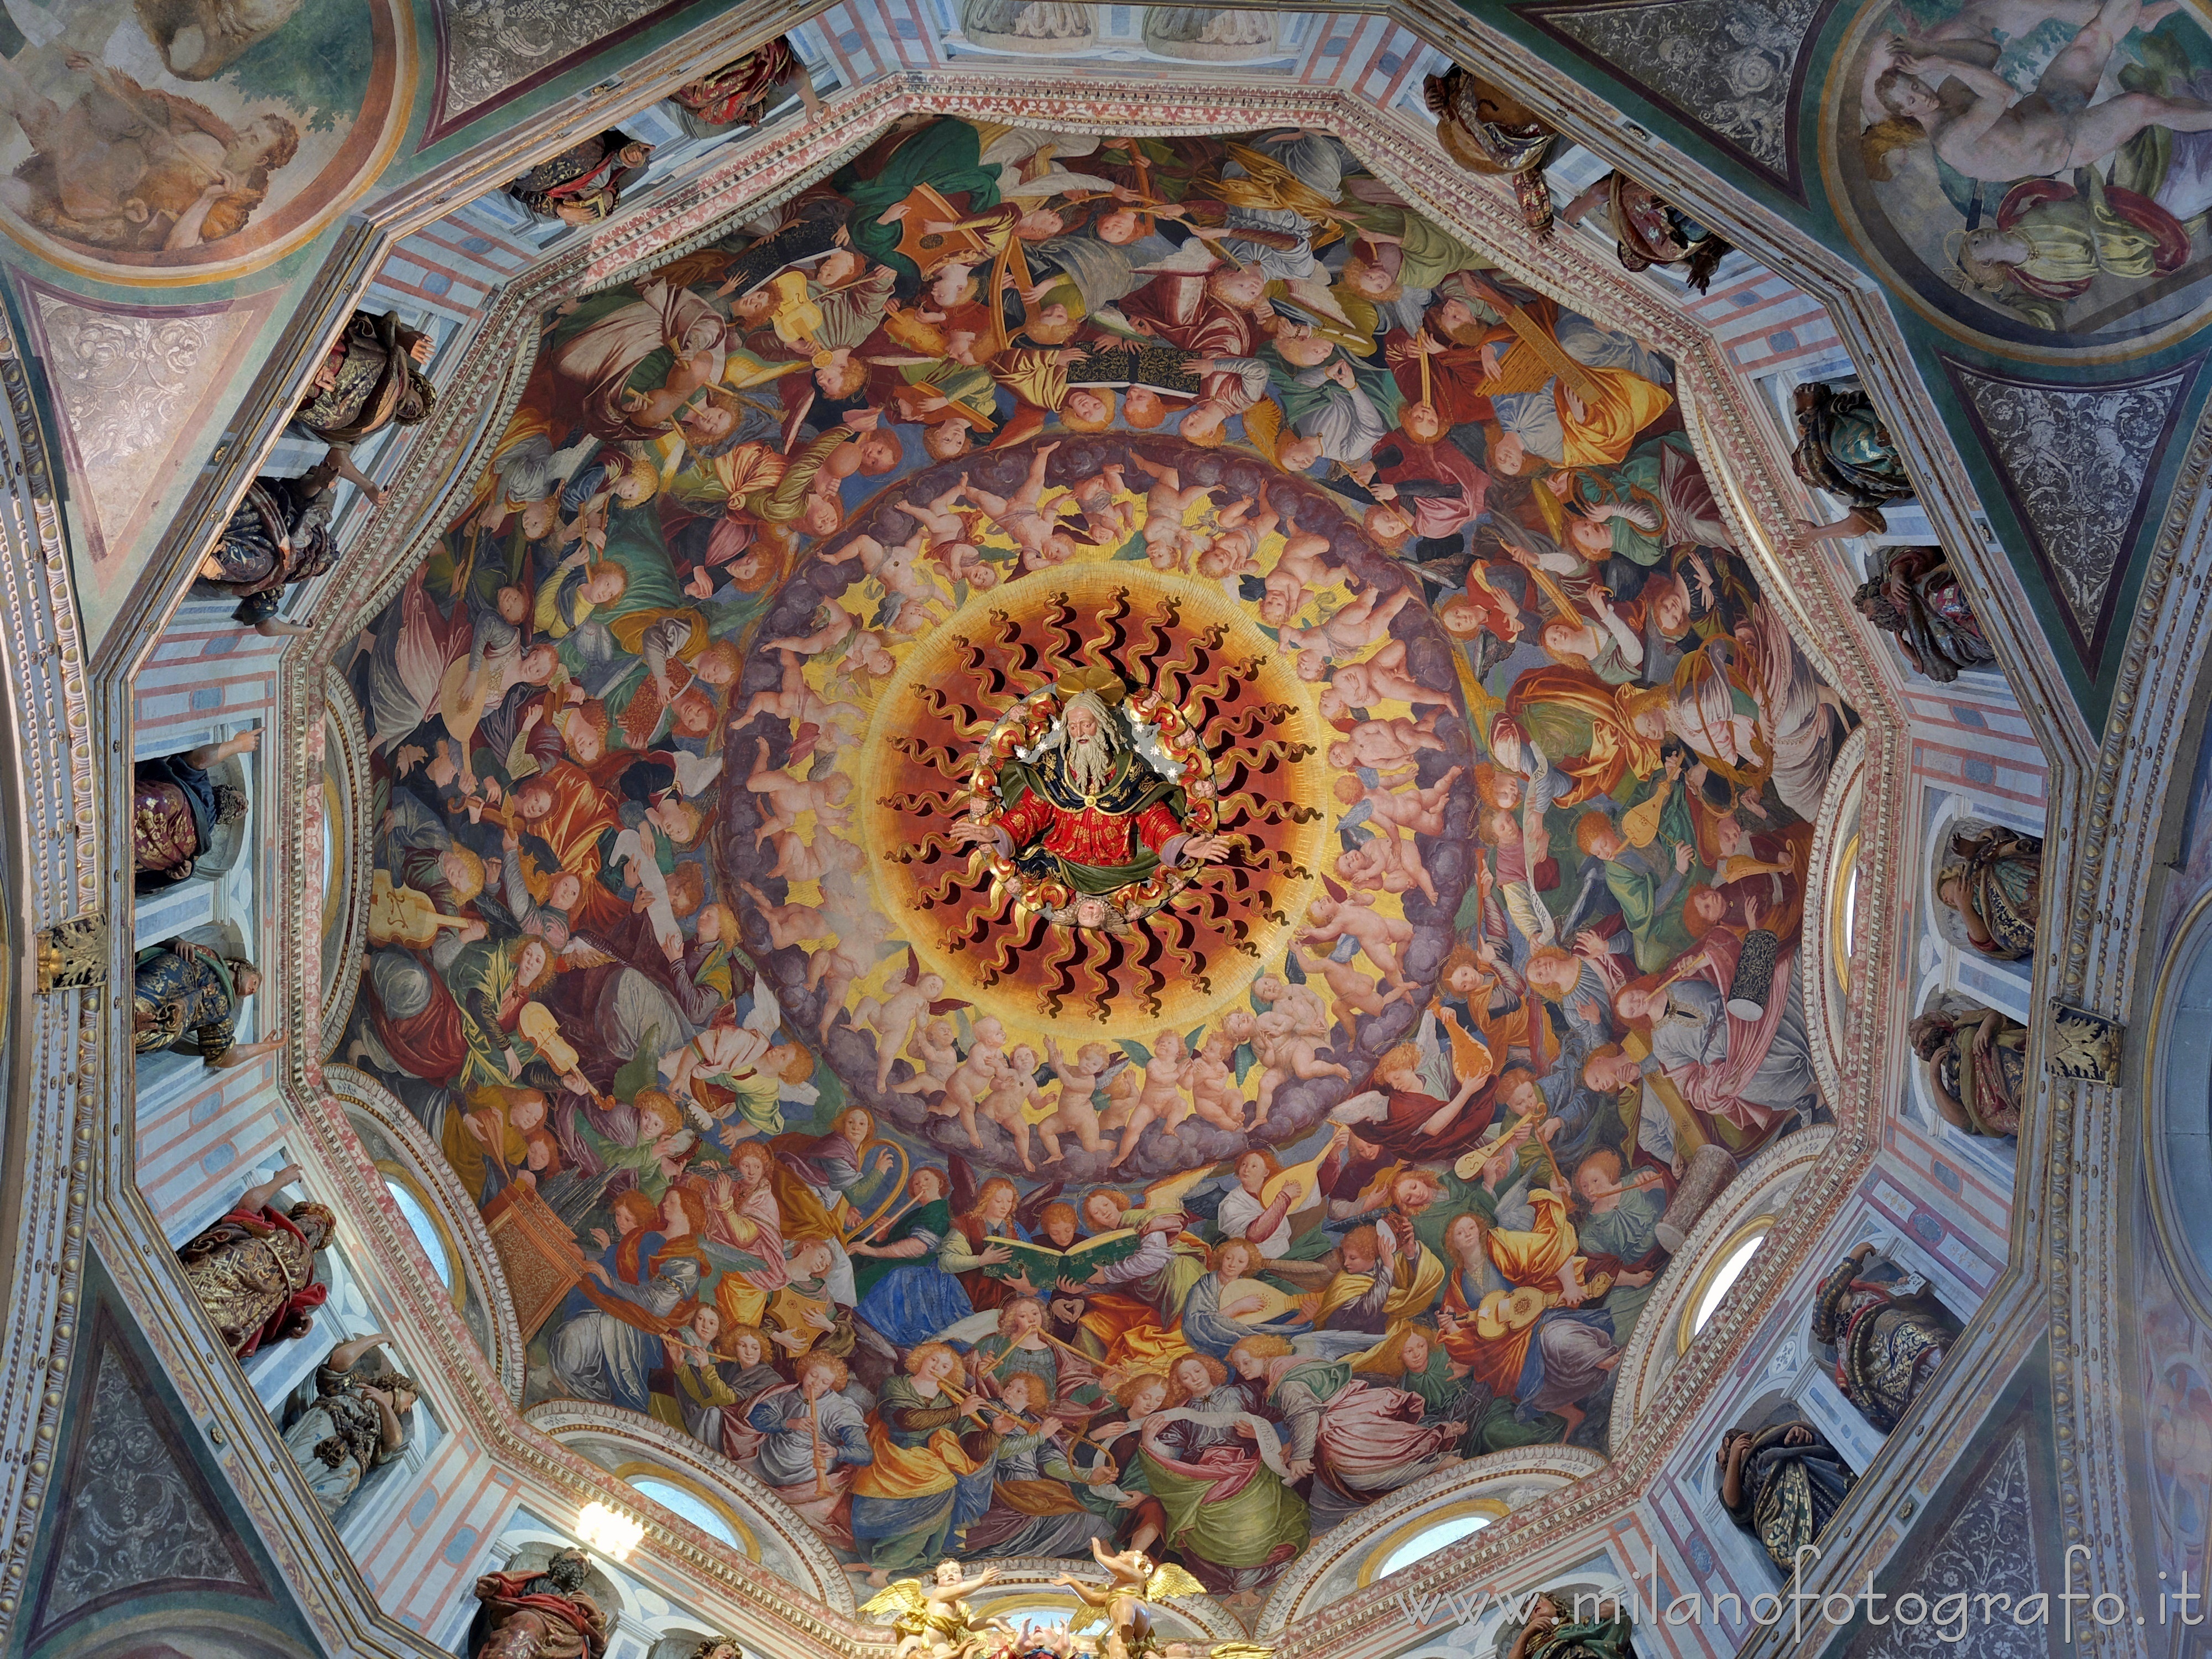 Saronno (Varese, Italy): Interior of the dome of the Sanctuary of the Blessed Virgin of the Miracles - Saronno (Varese, Italy)